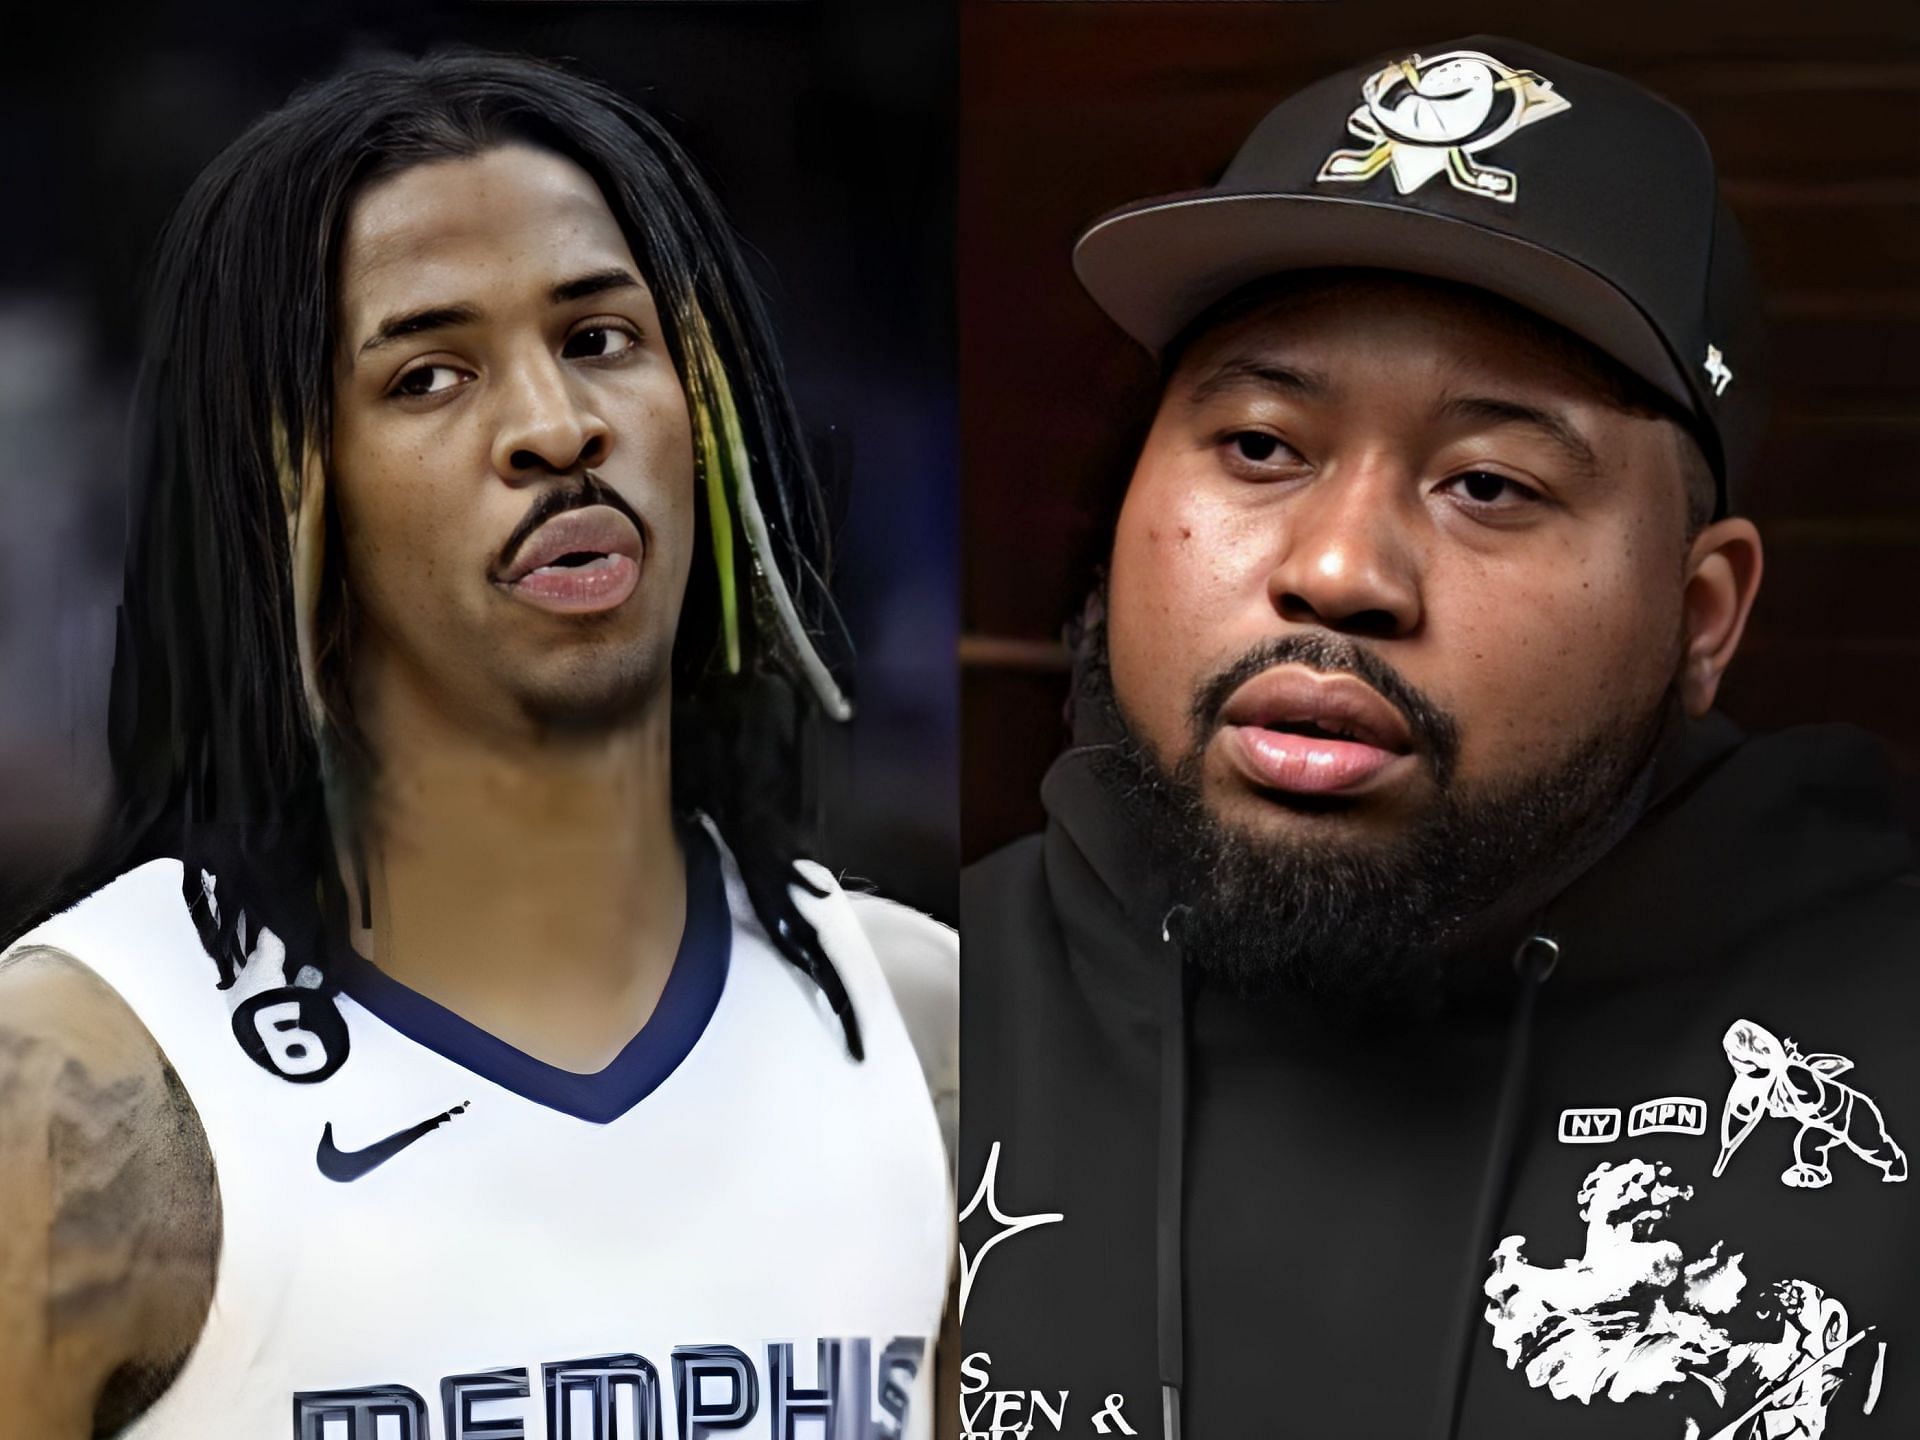 Memphis Grizzlies star point guard Ja Morant and podcaster and media personality DJ Akademiks